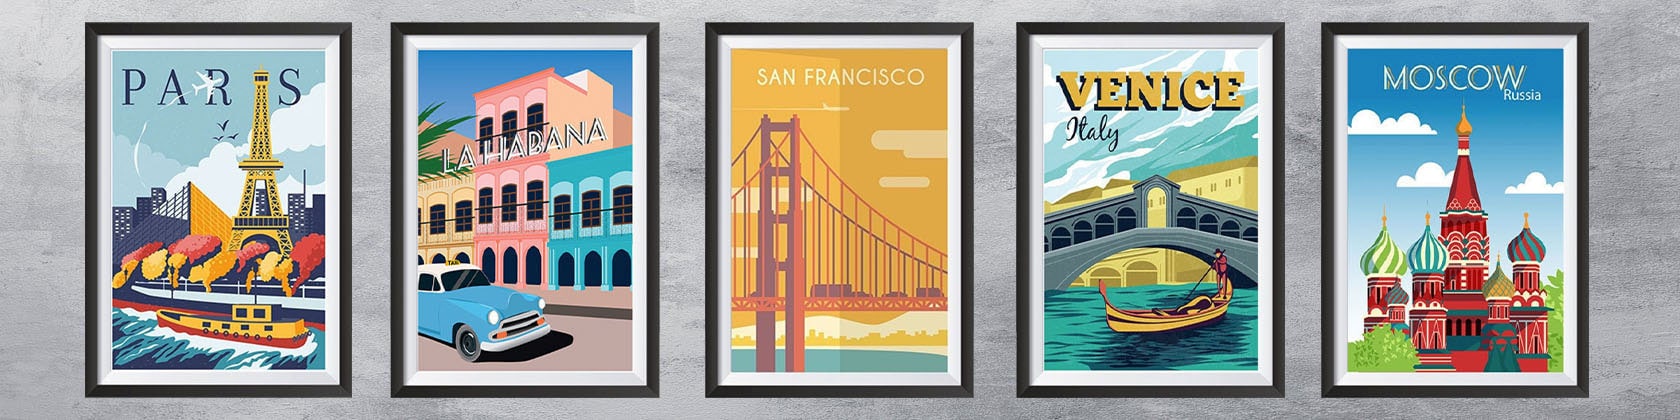 EzPosterPrints - Retro World Famous City Posters - Decorative, Vintage,  Retro, Grunge Travel Poster Printing - Wall Art Print for Home Office 